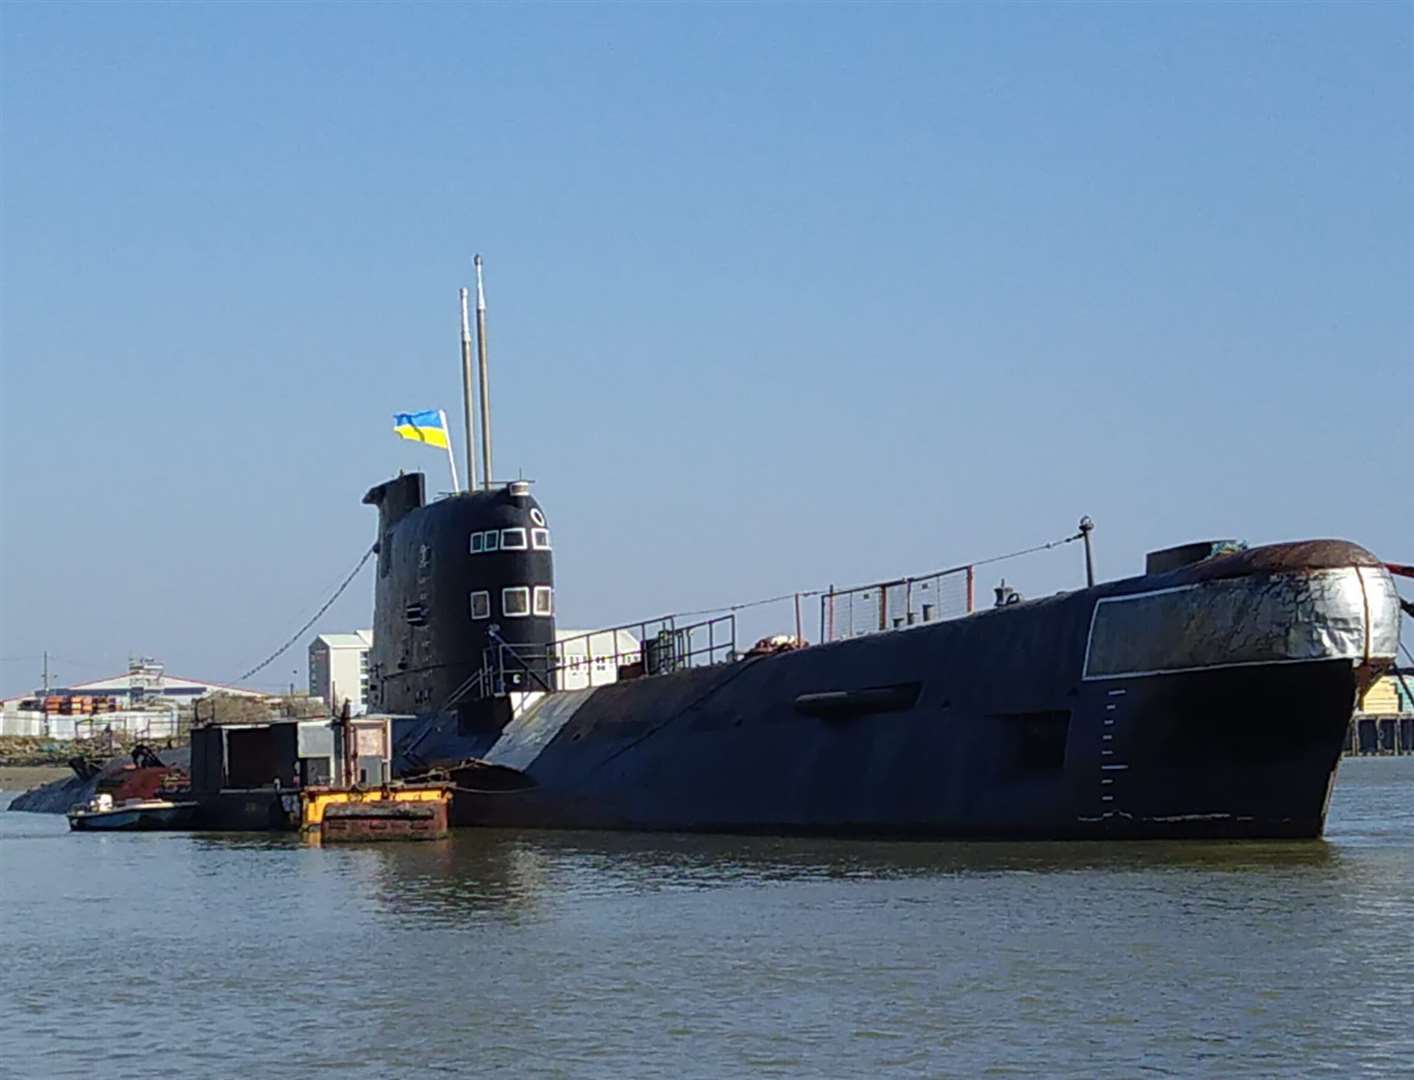 The Ukrainian flag flying on the Russian submarine moored on the River Medway